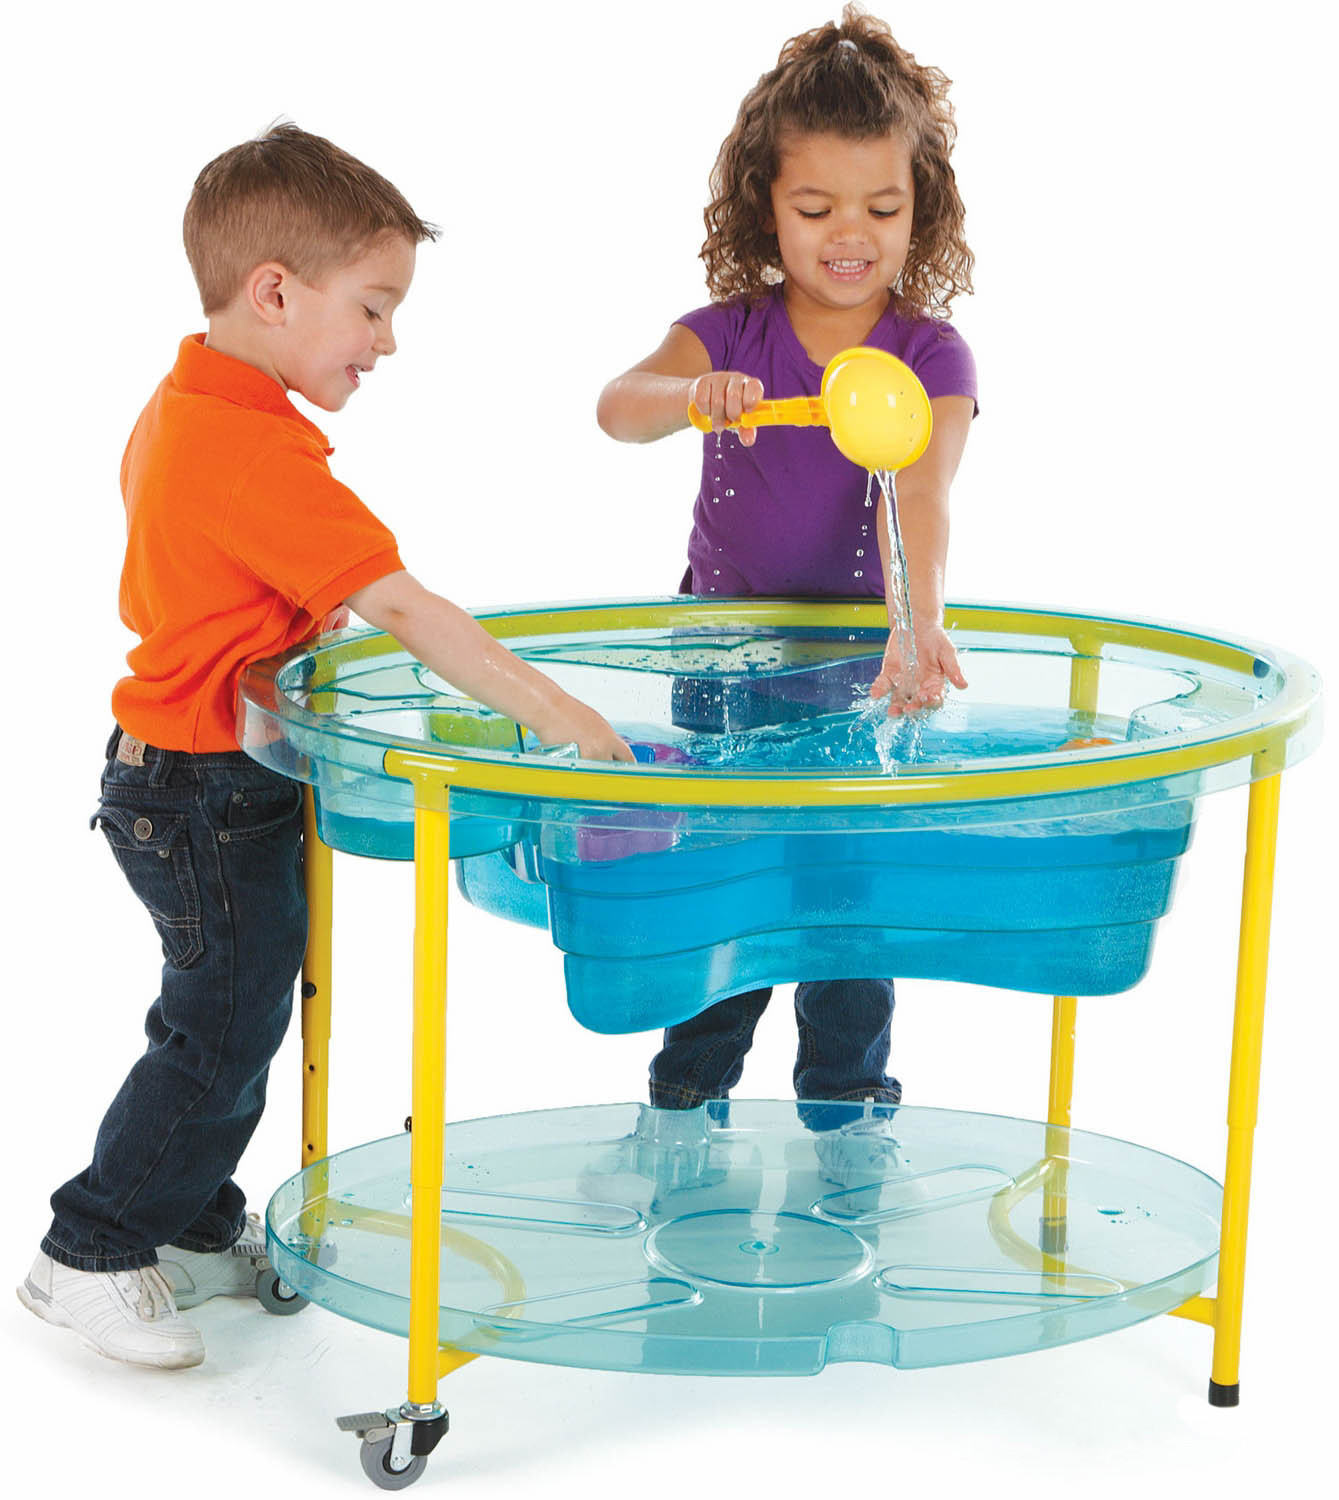 Water Table Kids
 Aquarius Sand & Water Table Play with a Purpose